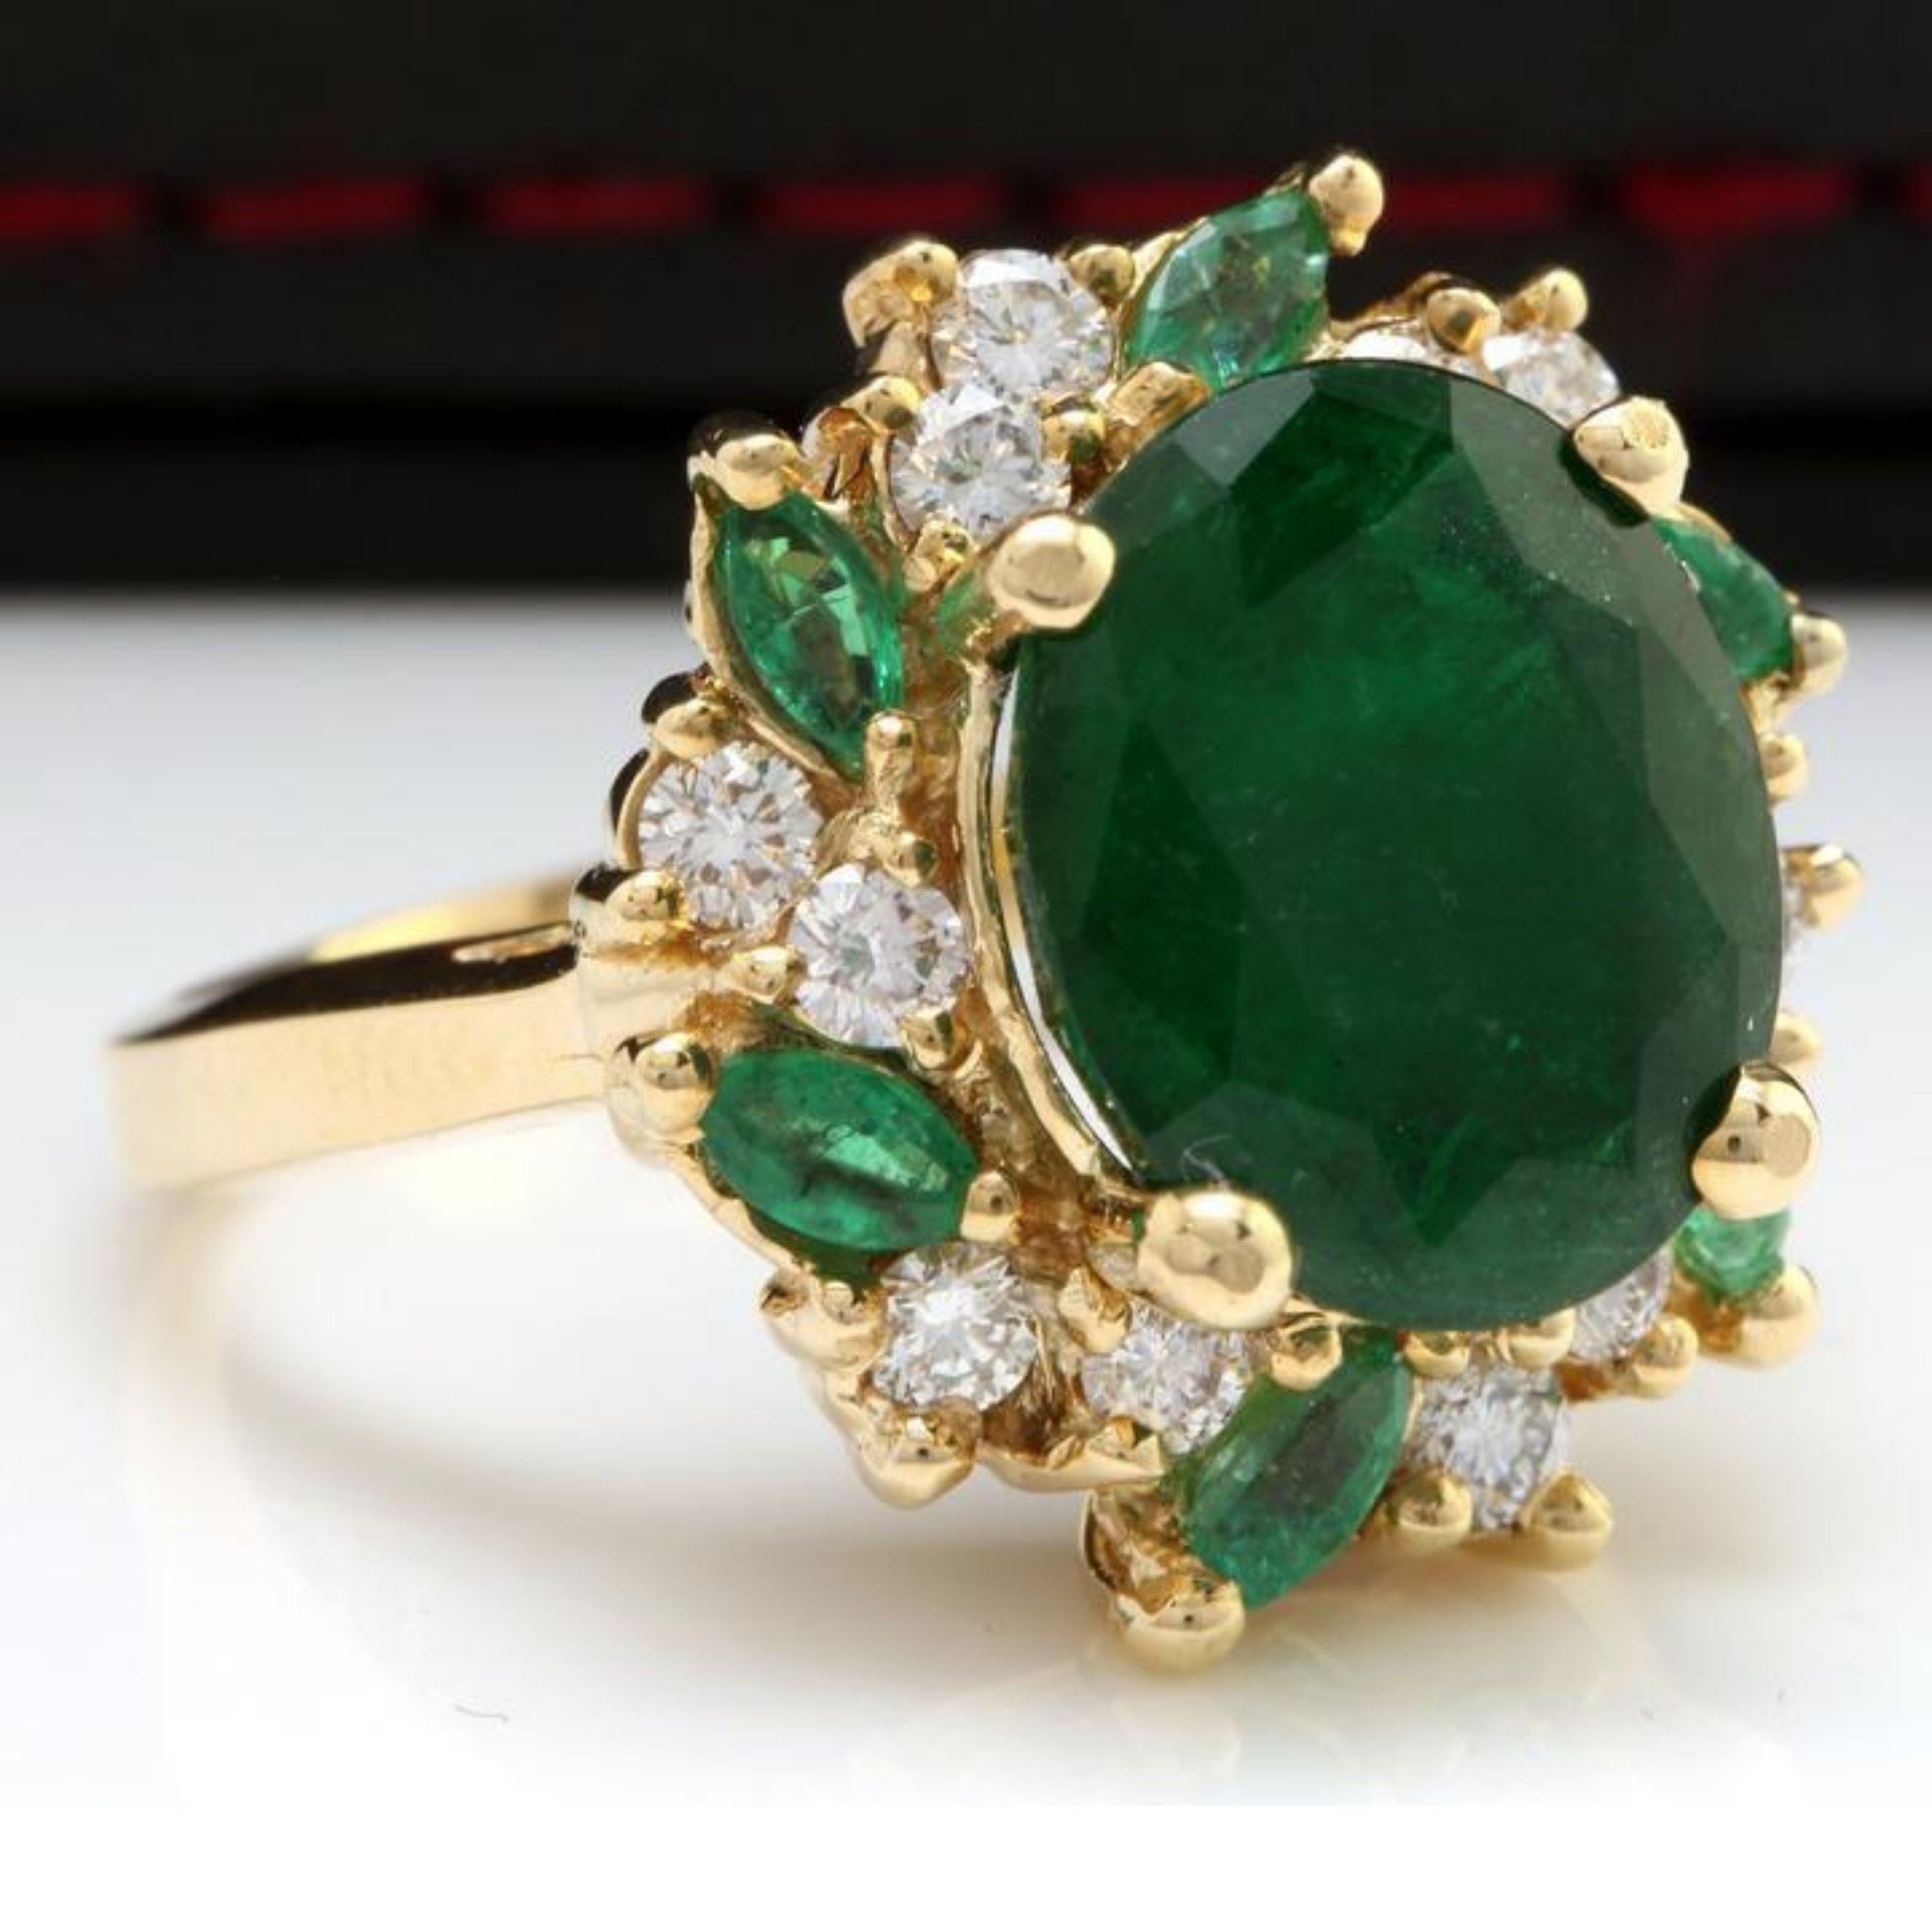 7.04 Carats Natural Emerald and Diamond 14K Solid Yellow Gold Ring

Total Natural Green Emeralds Weight is: Approx. 6.17 Carats

Center Emerald Cut Emerald Weight is: Approx. 5.42Ct

Total Side Marquise Cut Emeralds Weight is: Approx. 0.75Ct

Center